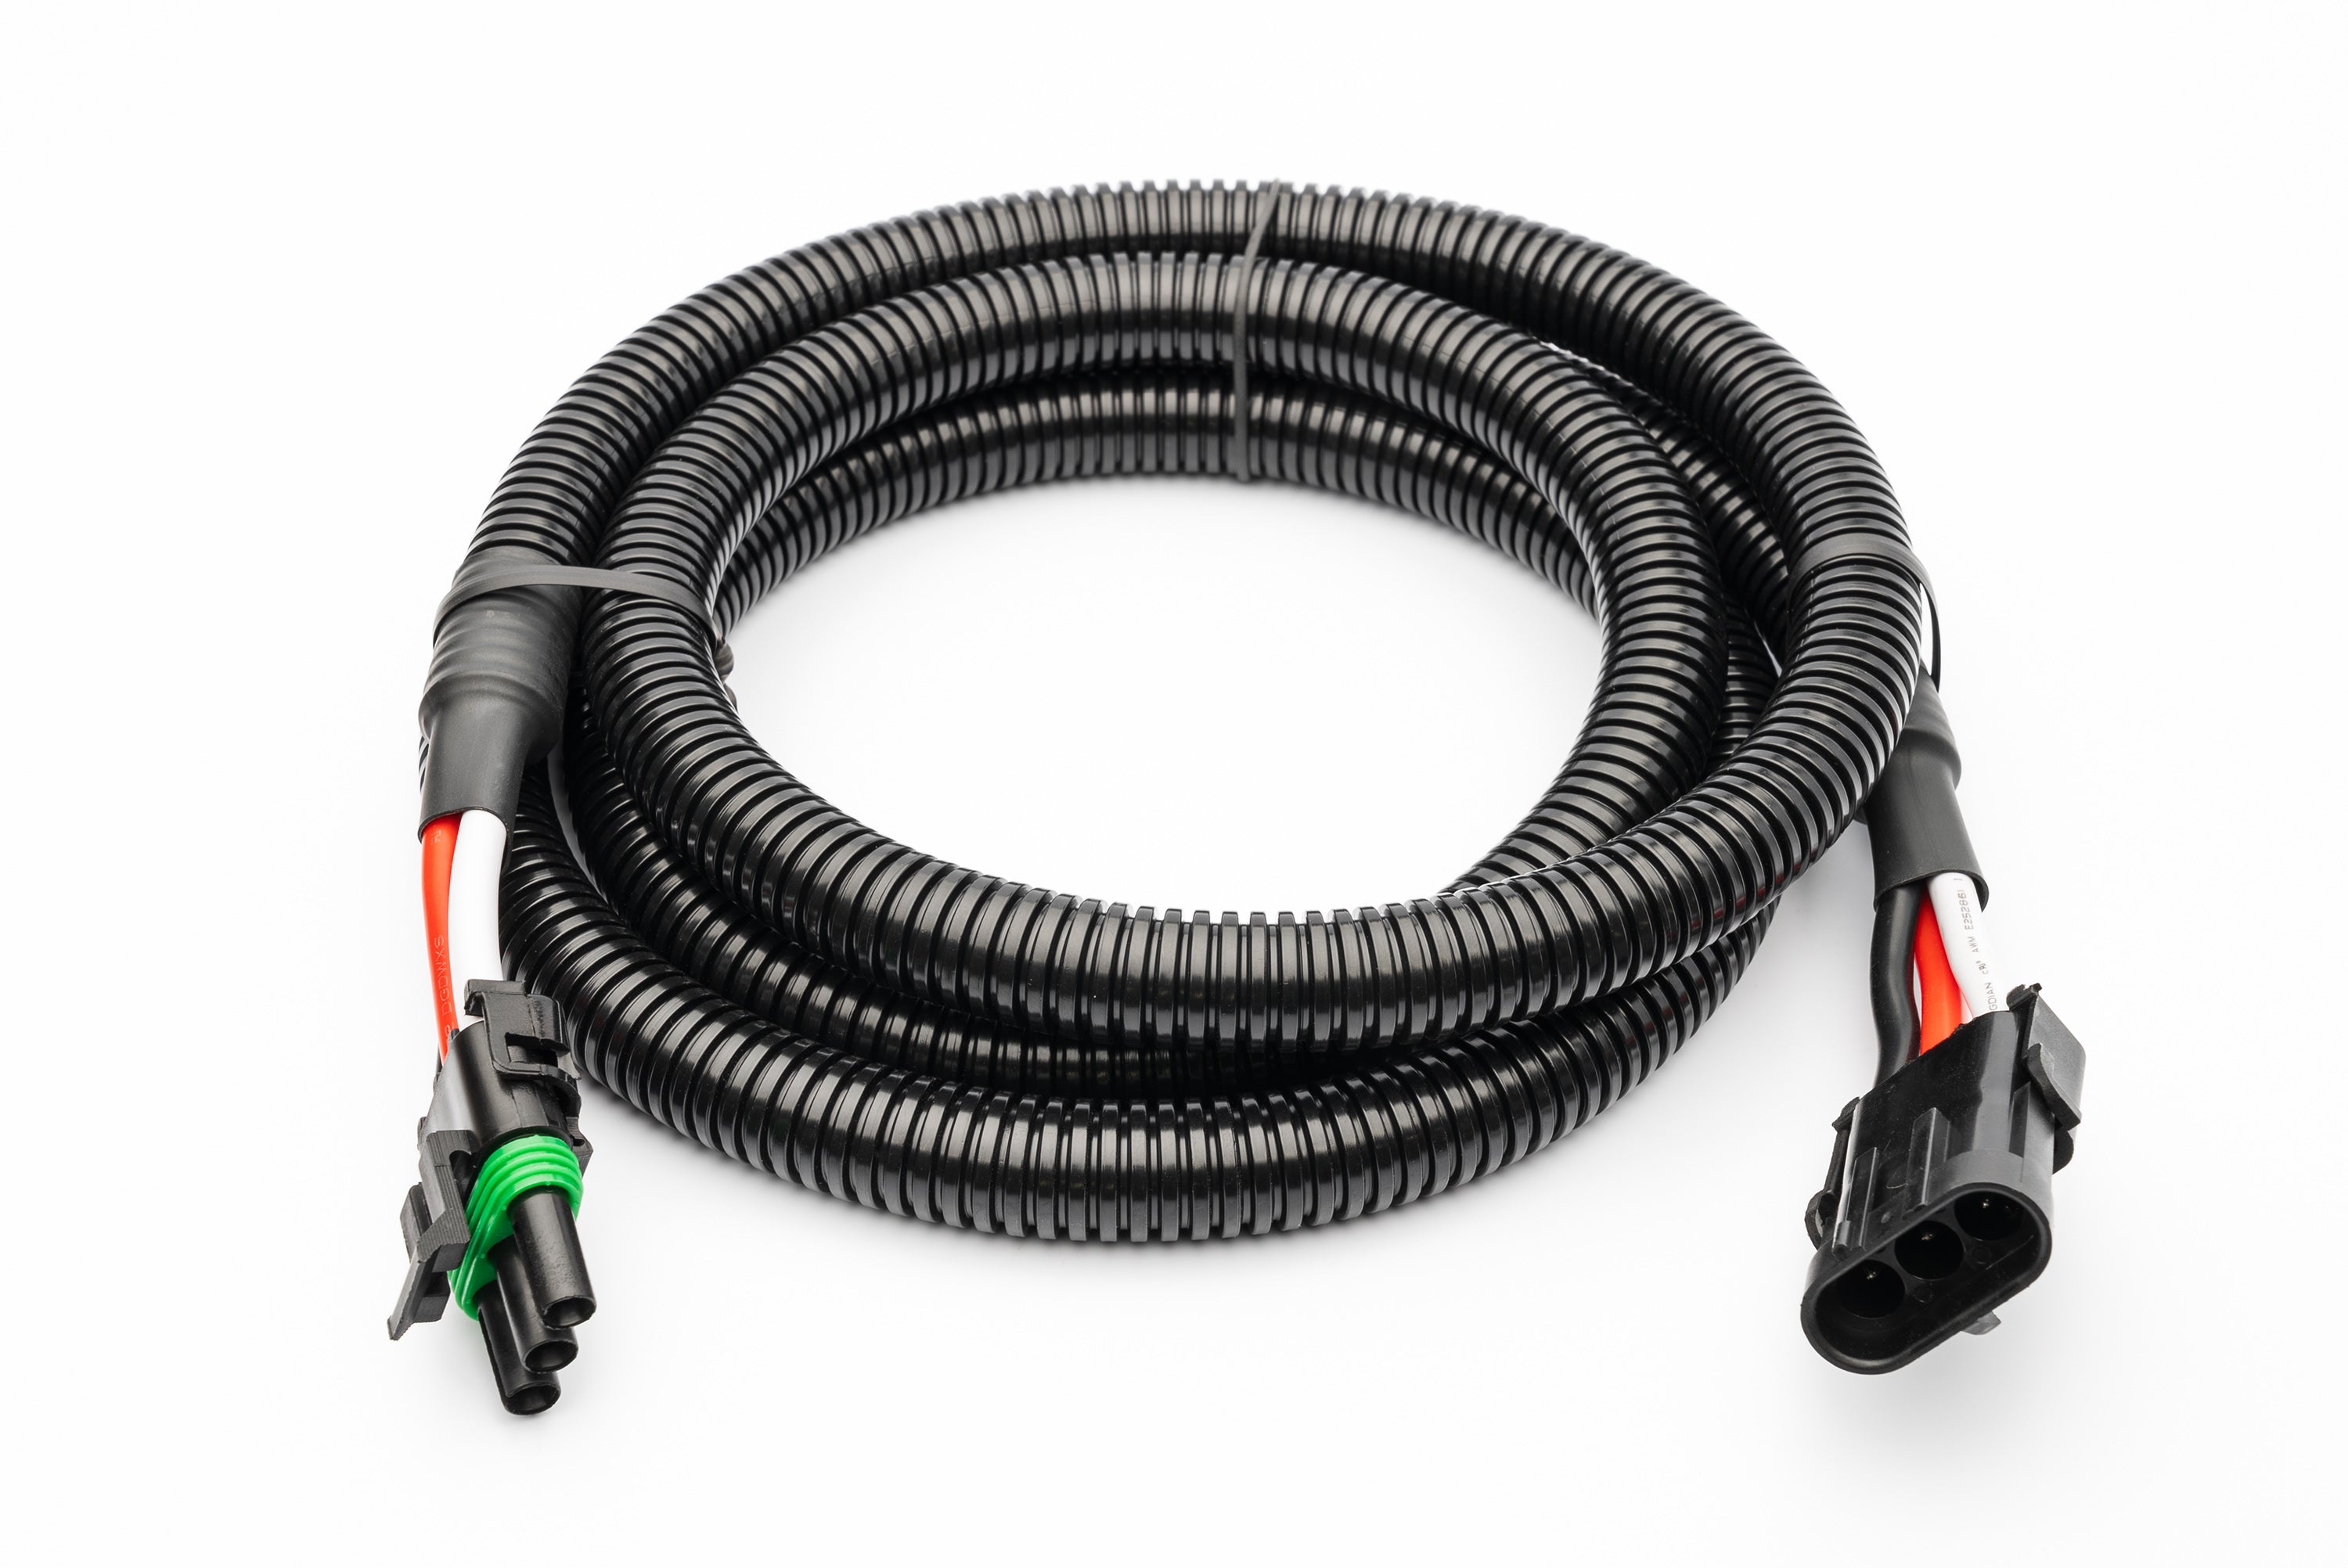 SPV Parts Harness 6 Foot HD Extension with 3 Pole Connectors (To Lights etc) - SPV Harness System